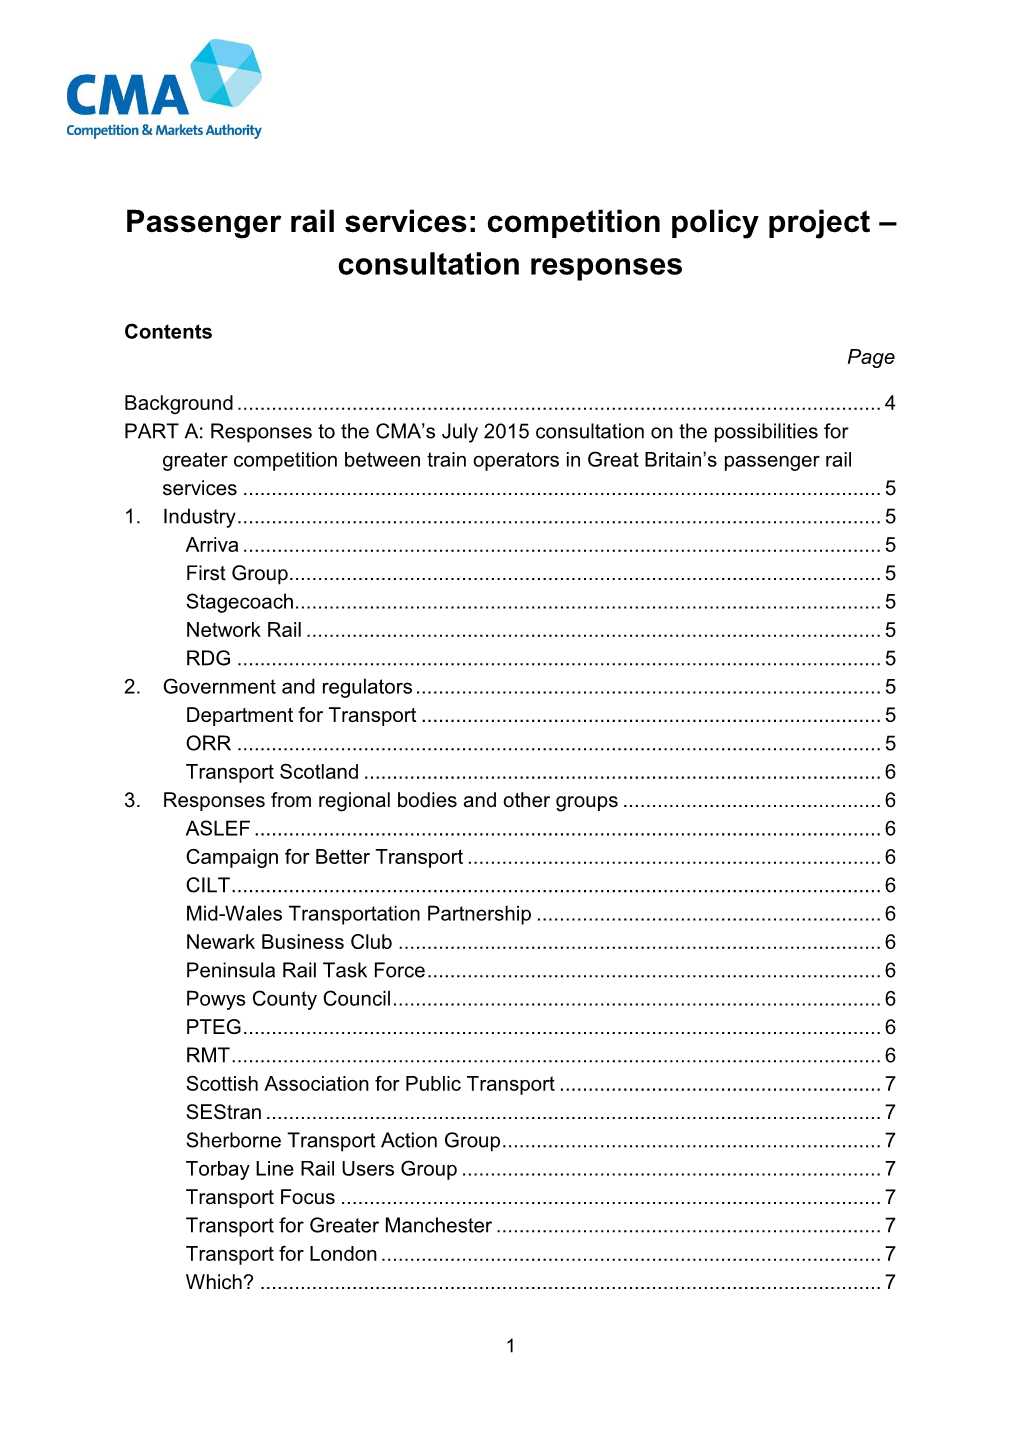 Passenger Rail Services: Competition Policy Project – Consultation Responses